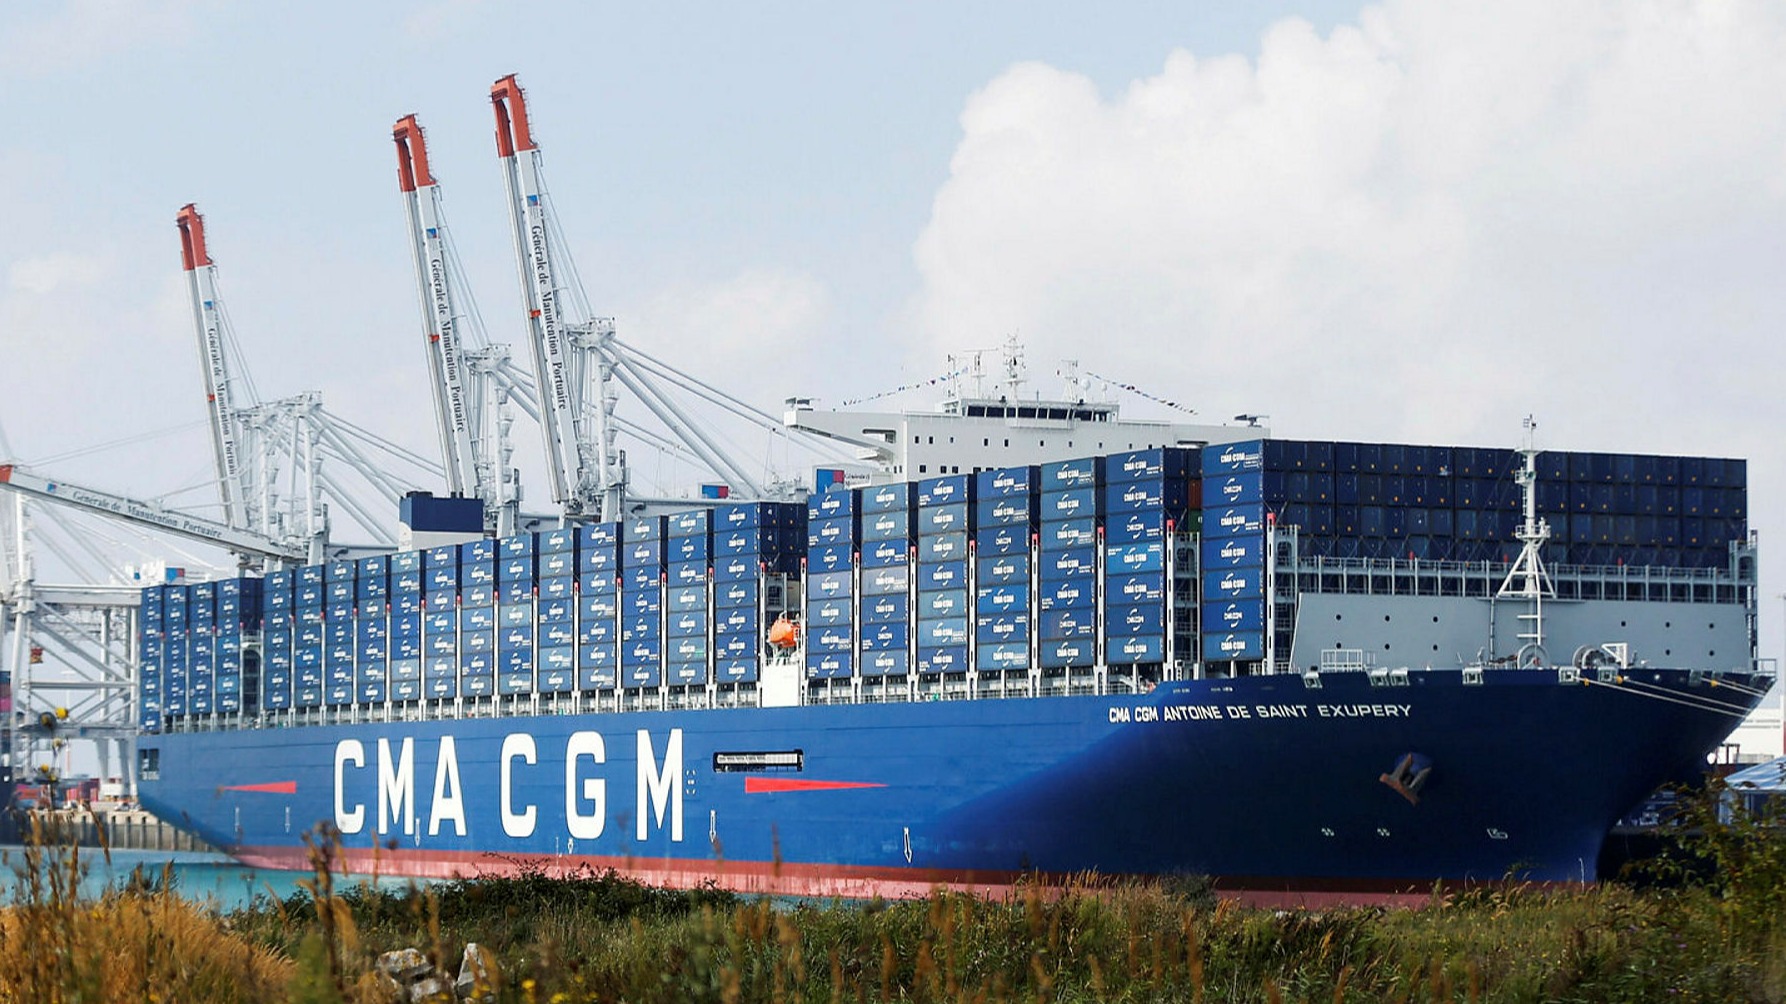 Shipping group CMA CGM to take Air France-KLM stake under cargo tie-up | Financial Times